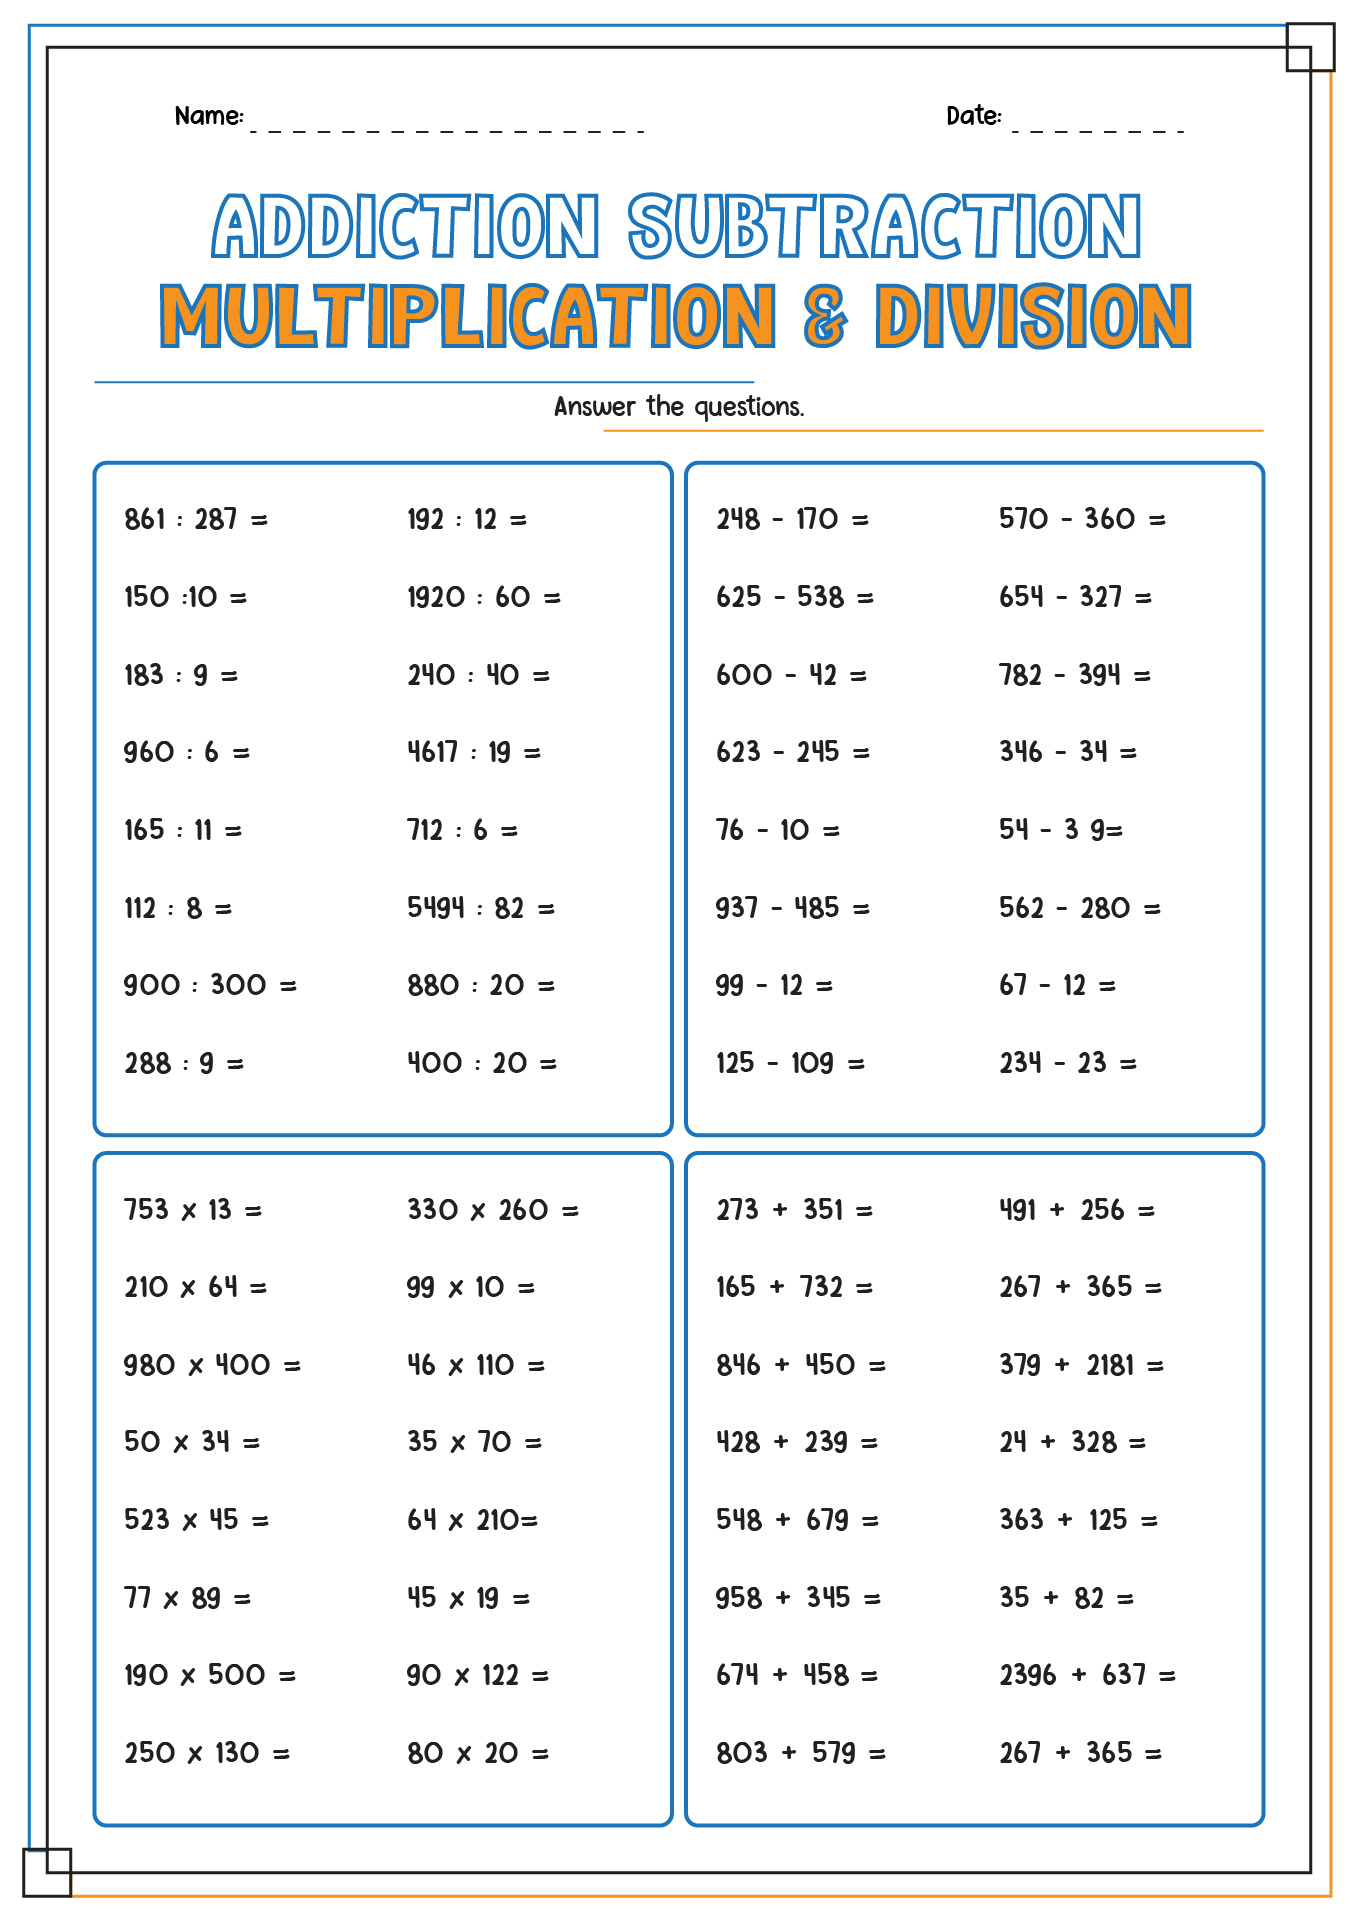 Addition Subtraction Multiplication and Division Worksheets